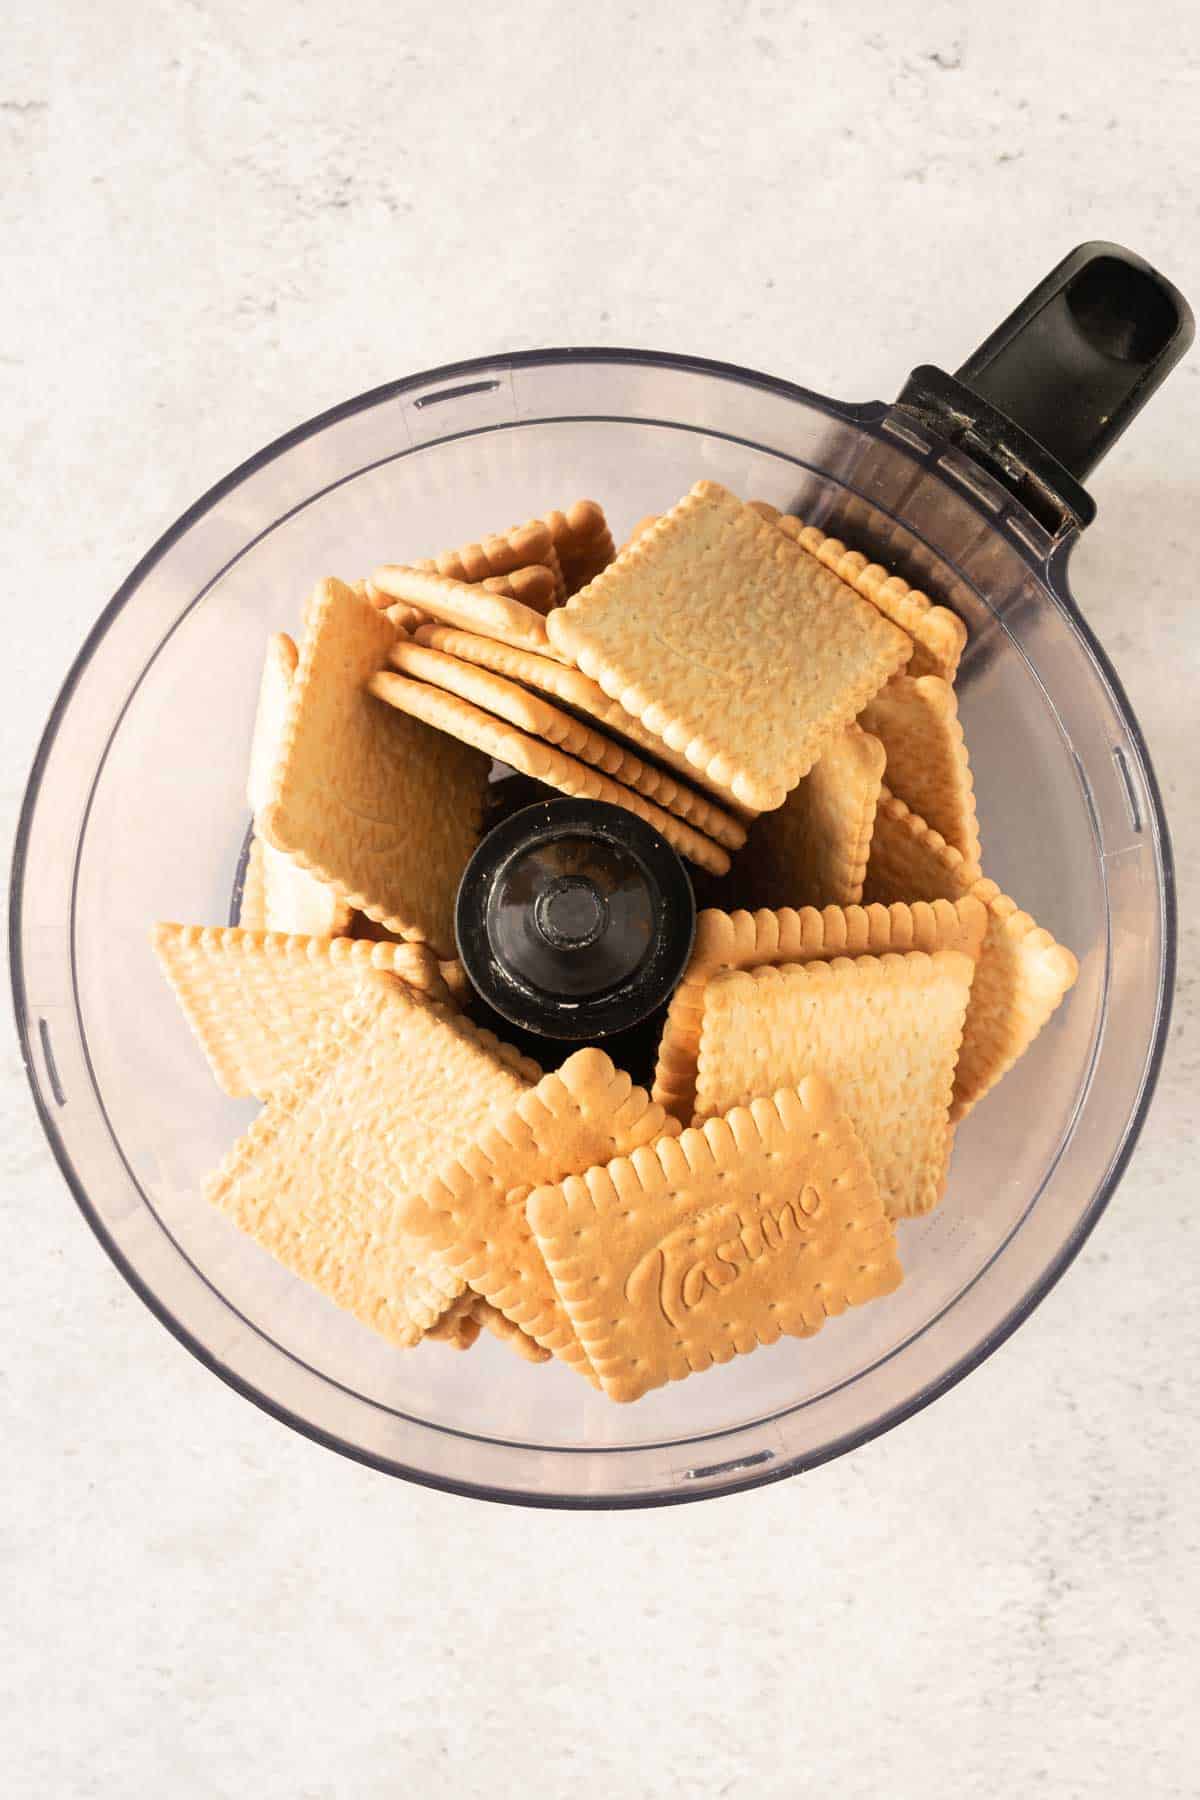 Biscuits in a food processor on a white background.